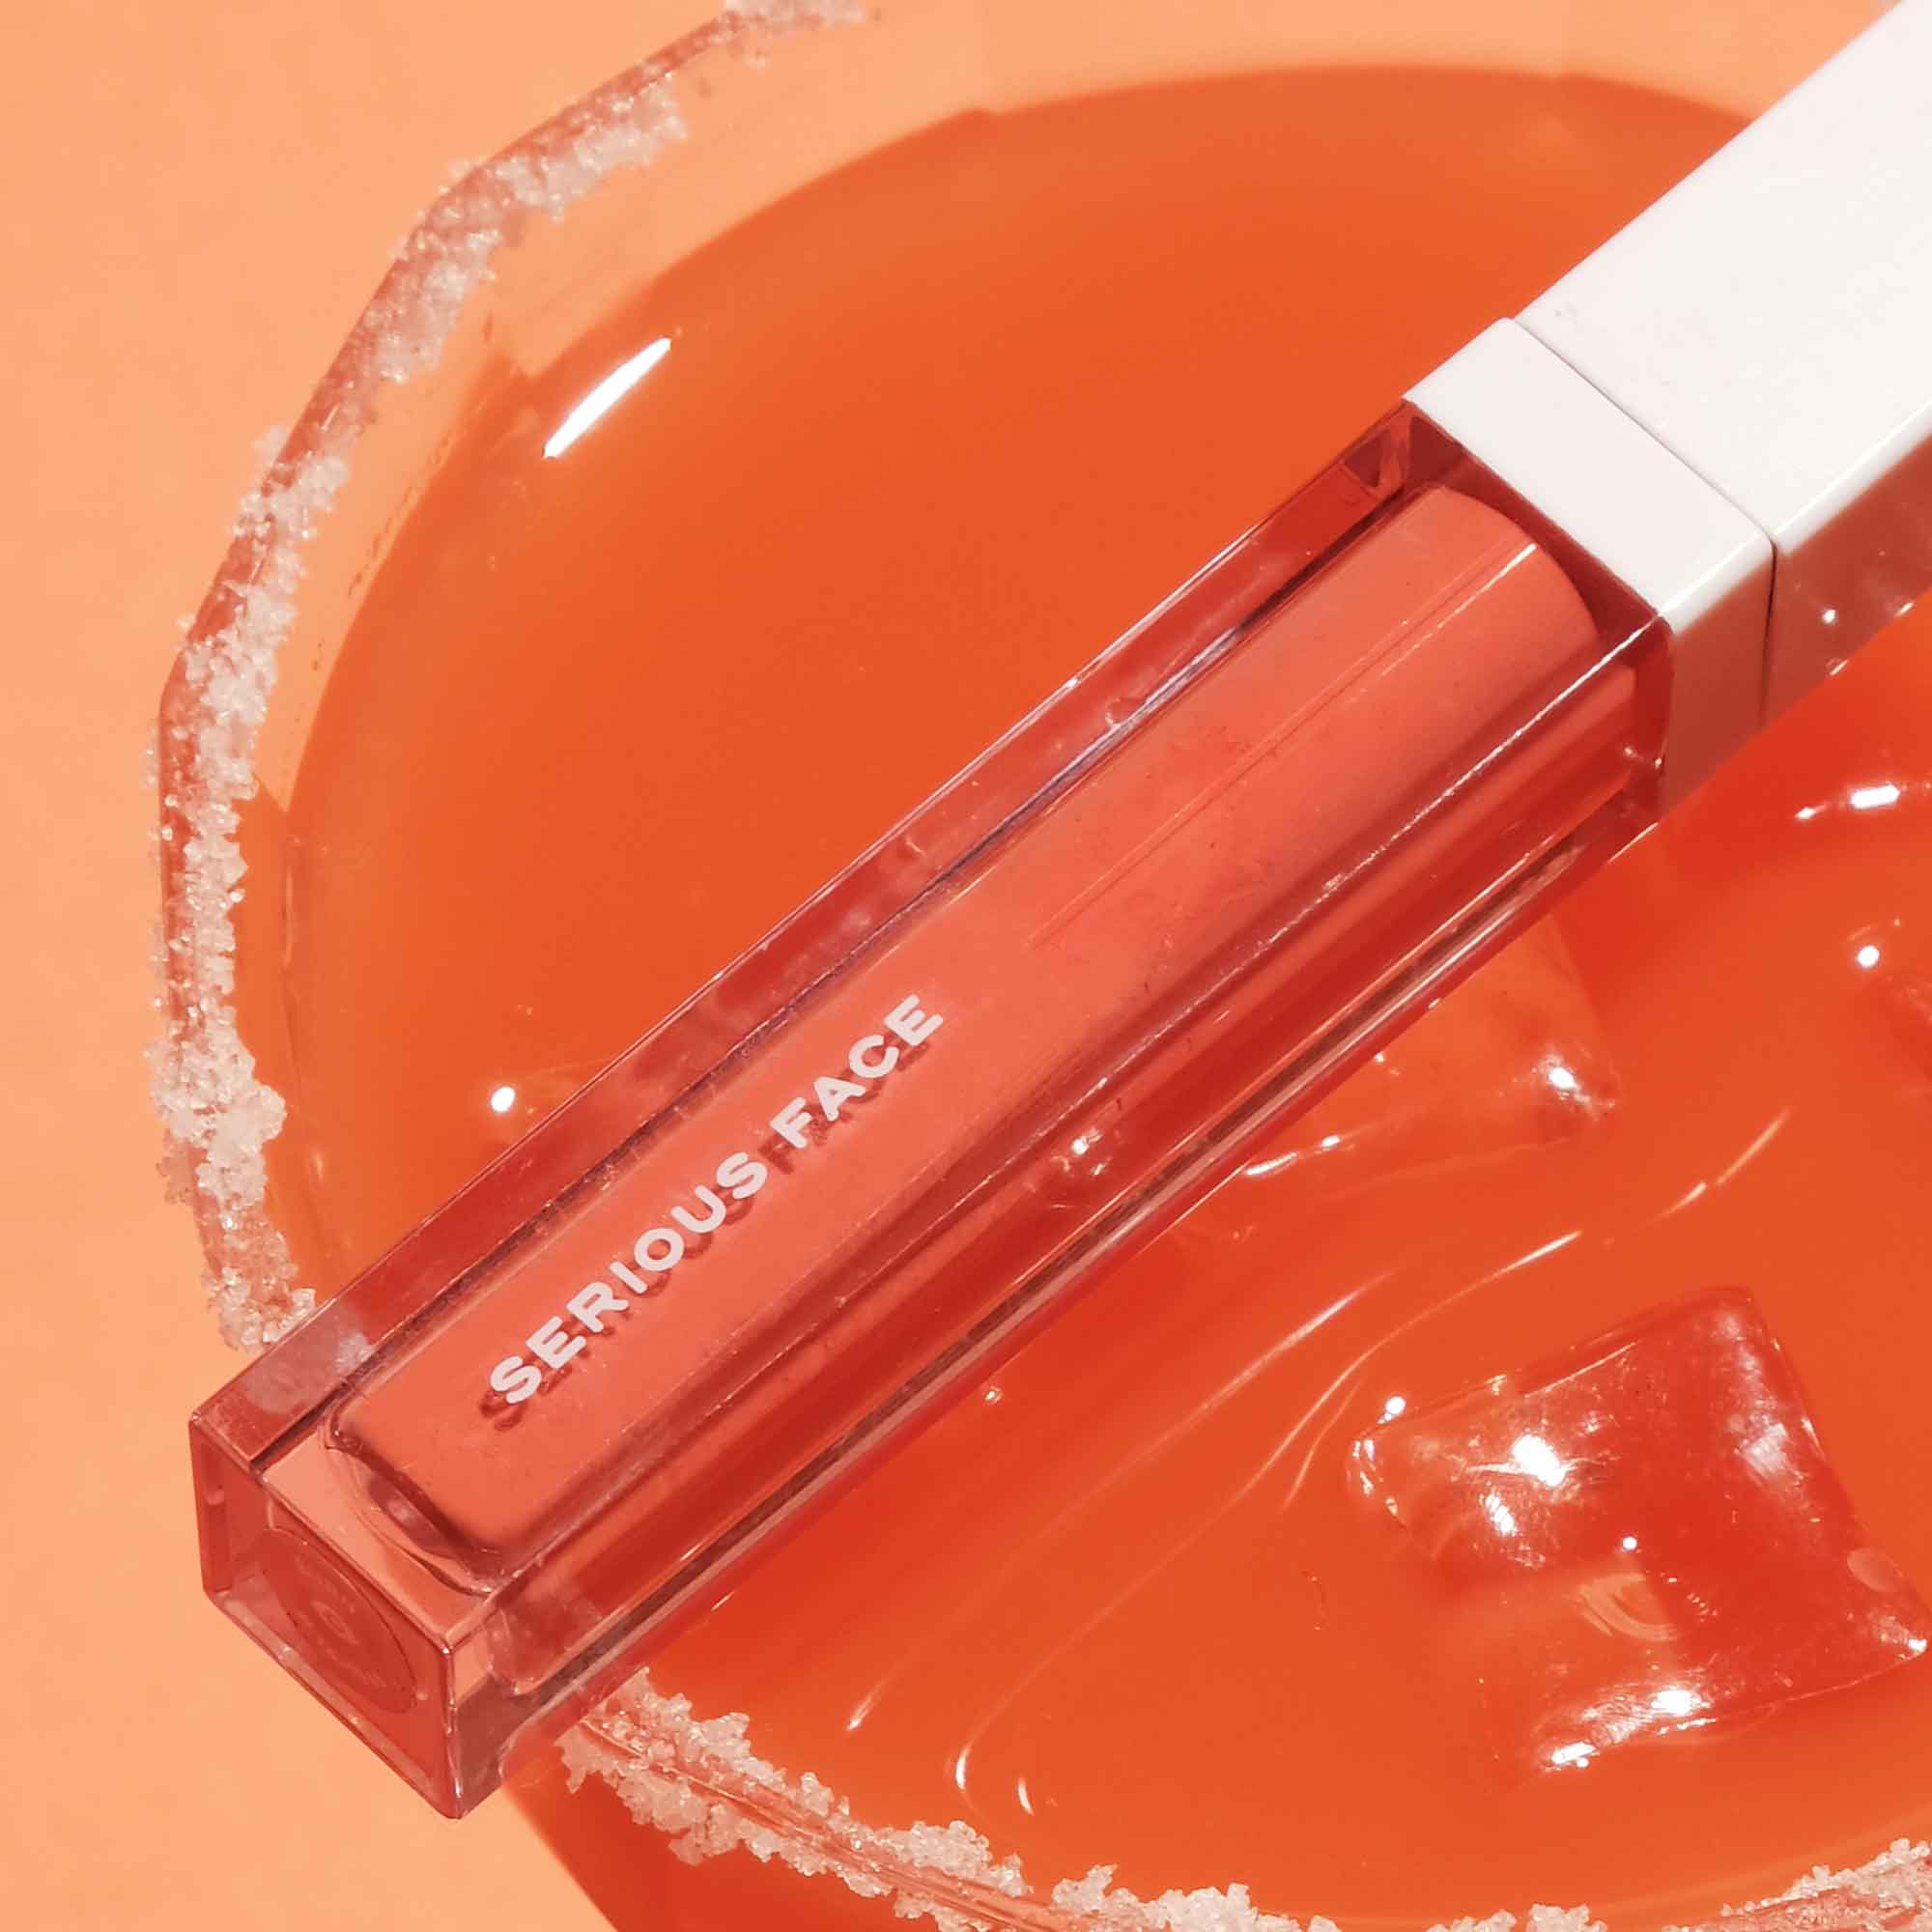 A photo of Serious Face's orange lipstick or beauty stick on a cocktail glass